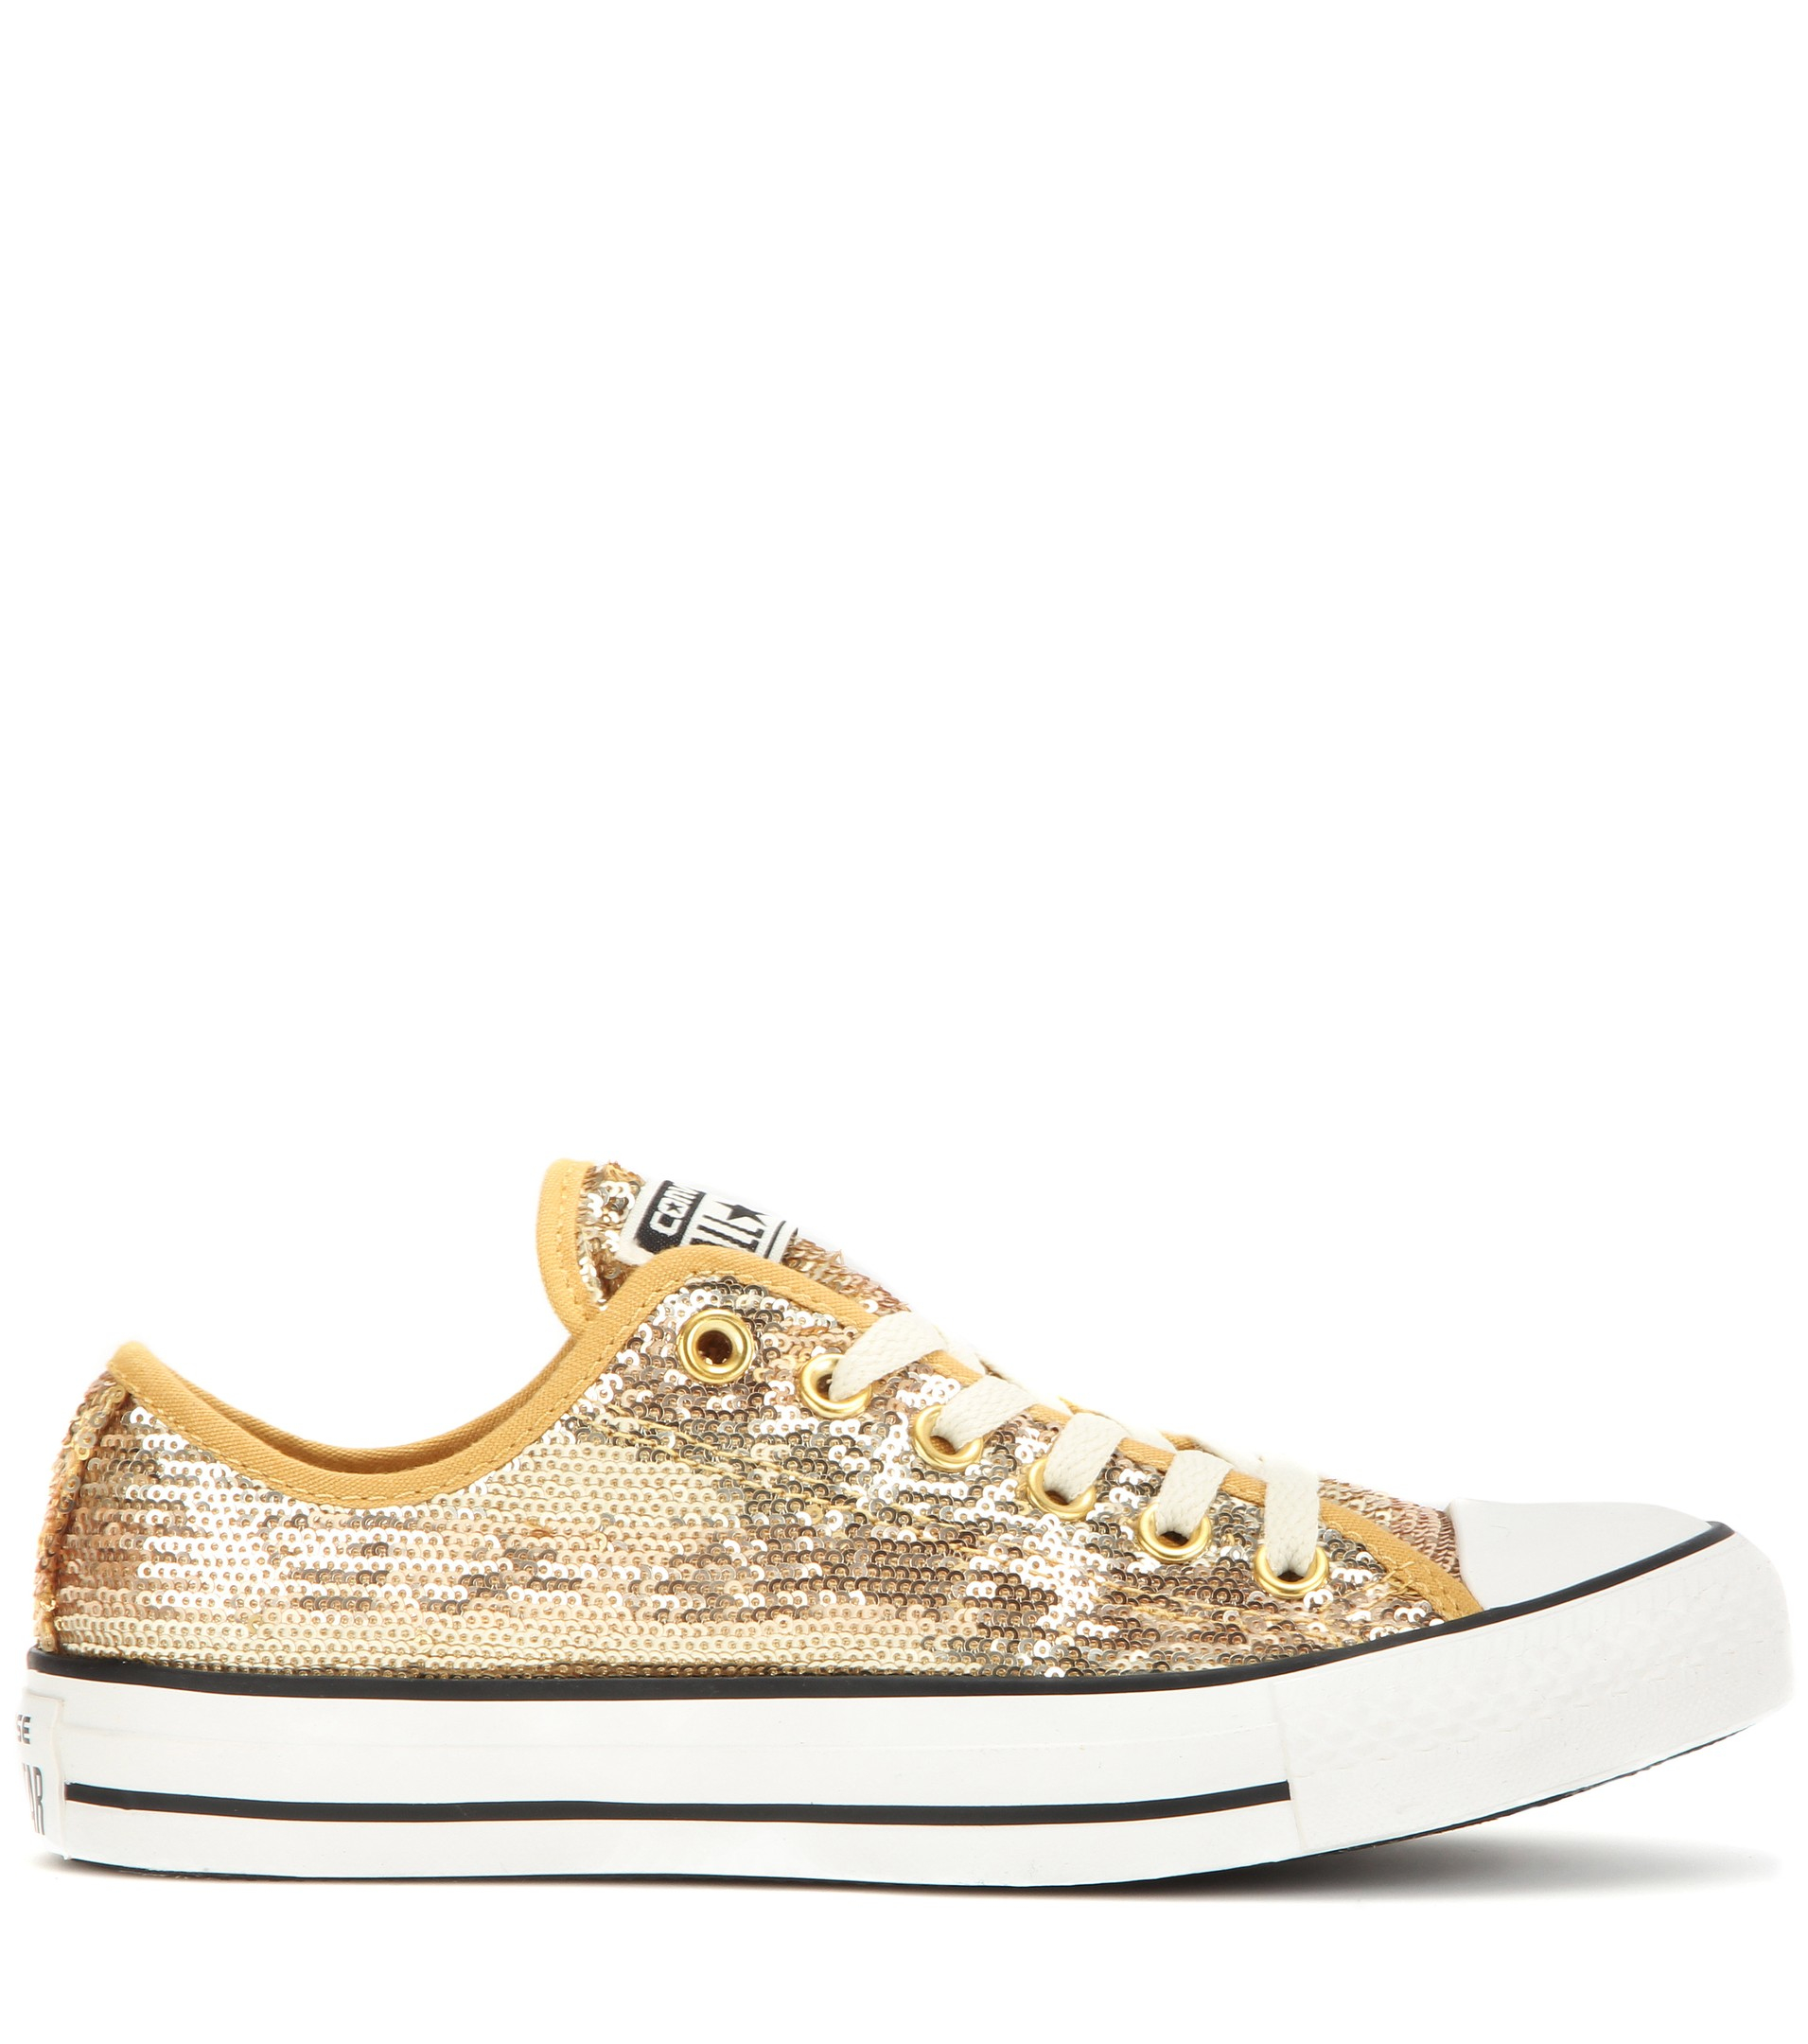 Converse Chuck Taylor All Star Sequin Sneakers in Gold/White (Metallic) -  Lyst